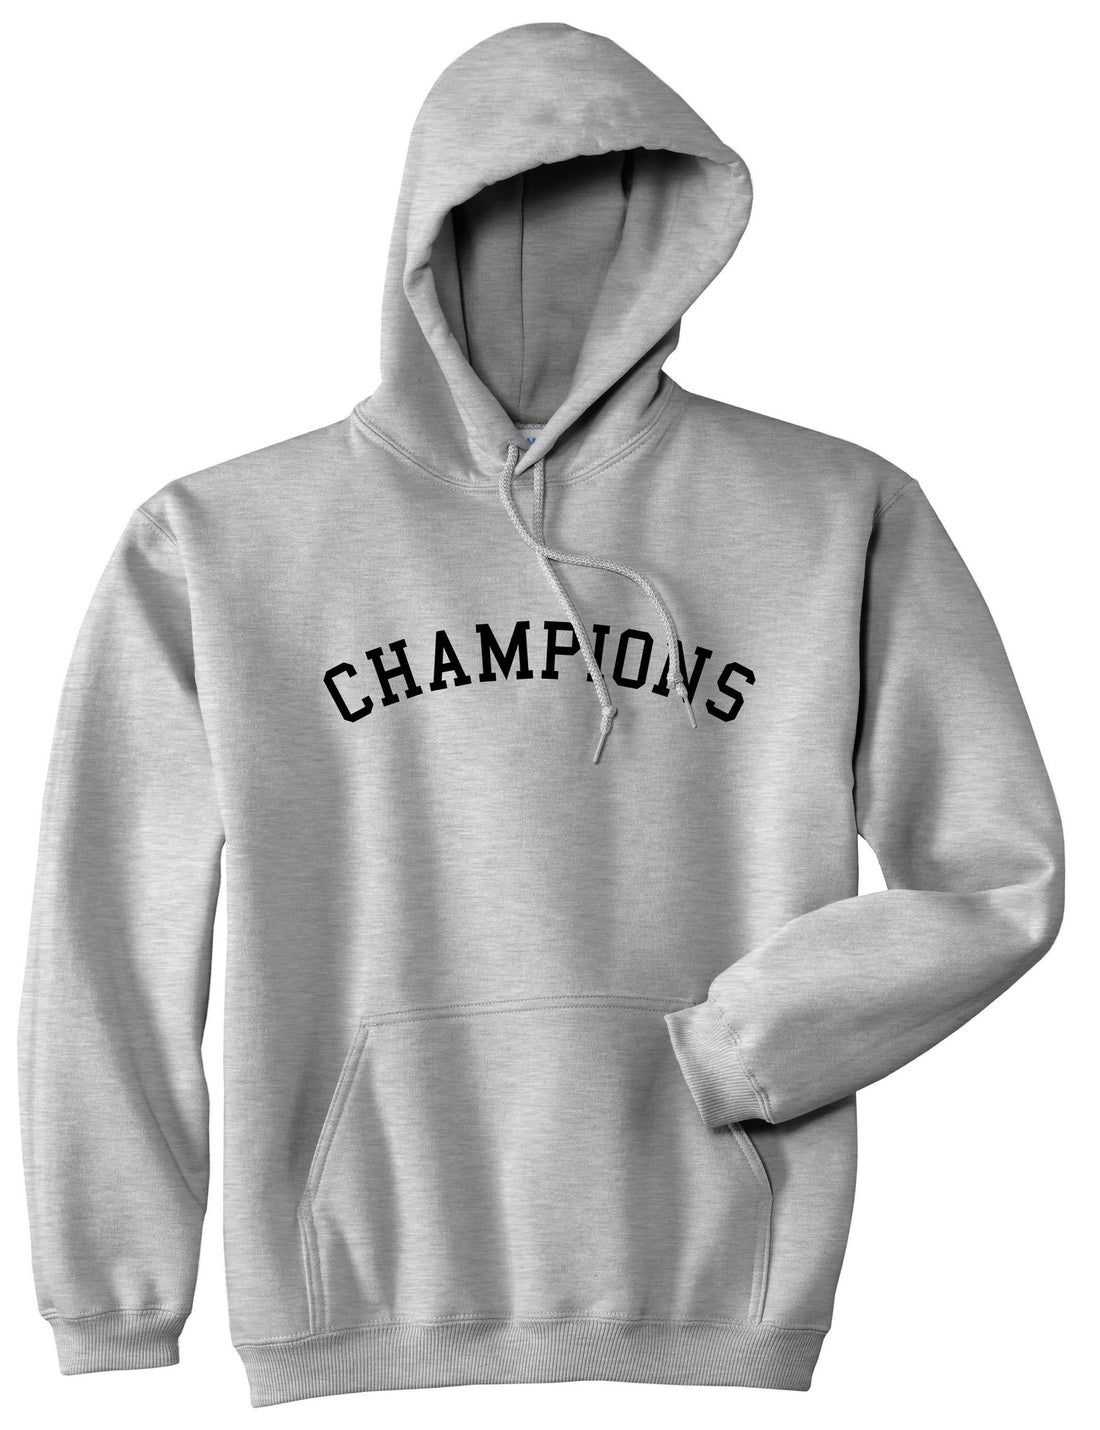 Champions Pullover Hoodie Hoody in Grey by Kings Of NY